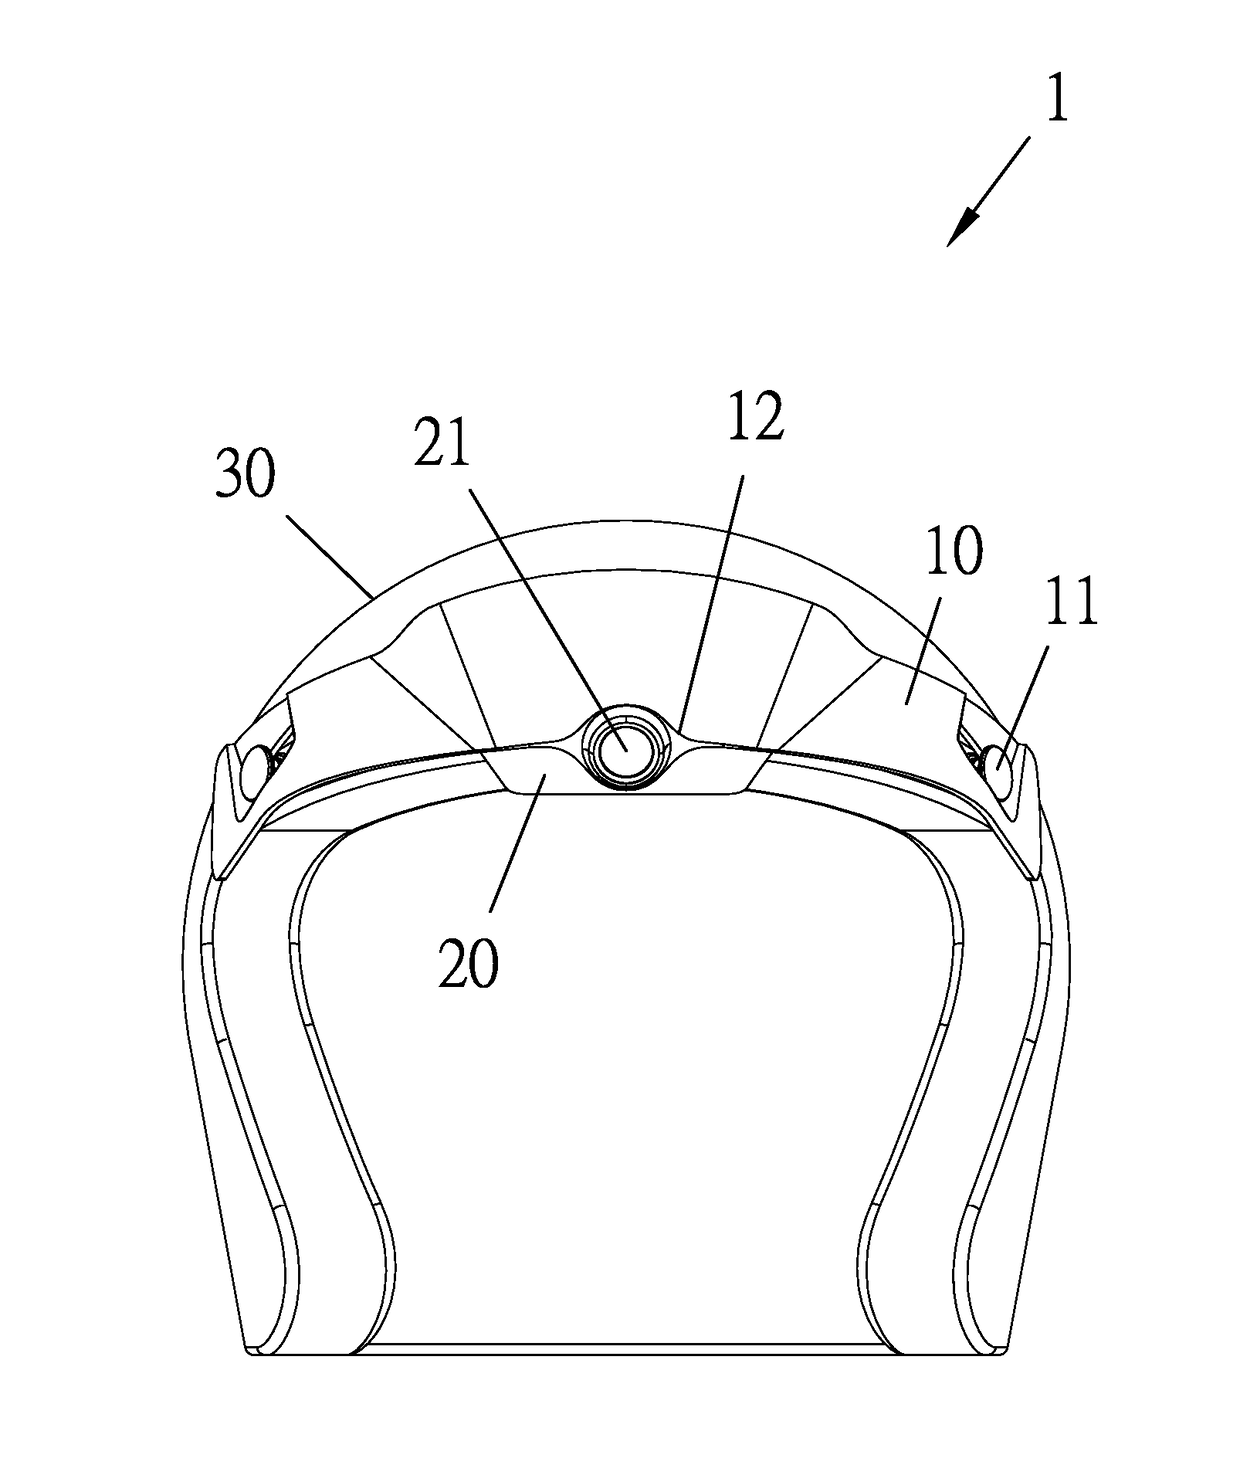 Structure for fixing riding recorder with helmet visor fastener